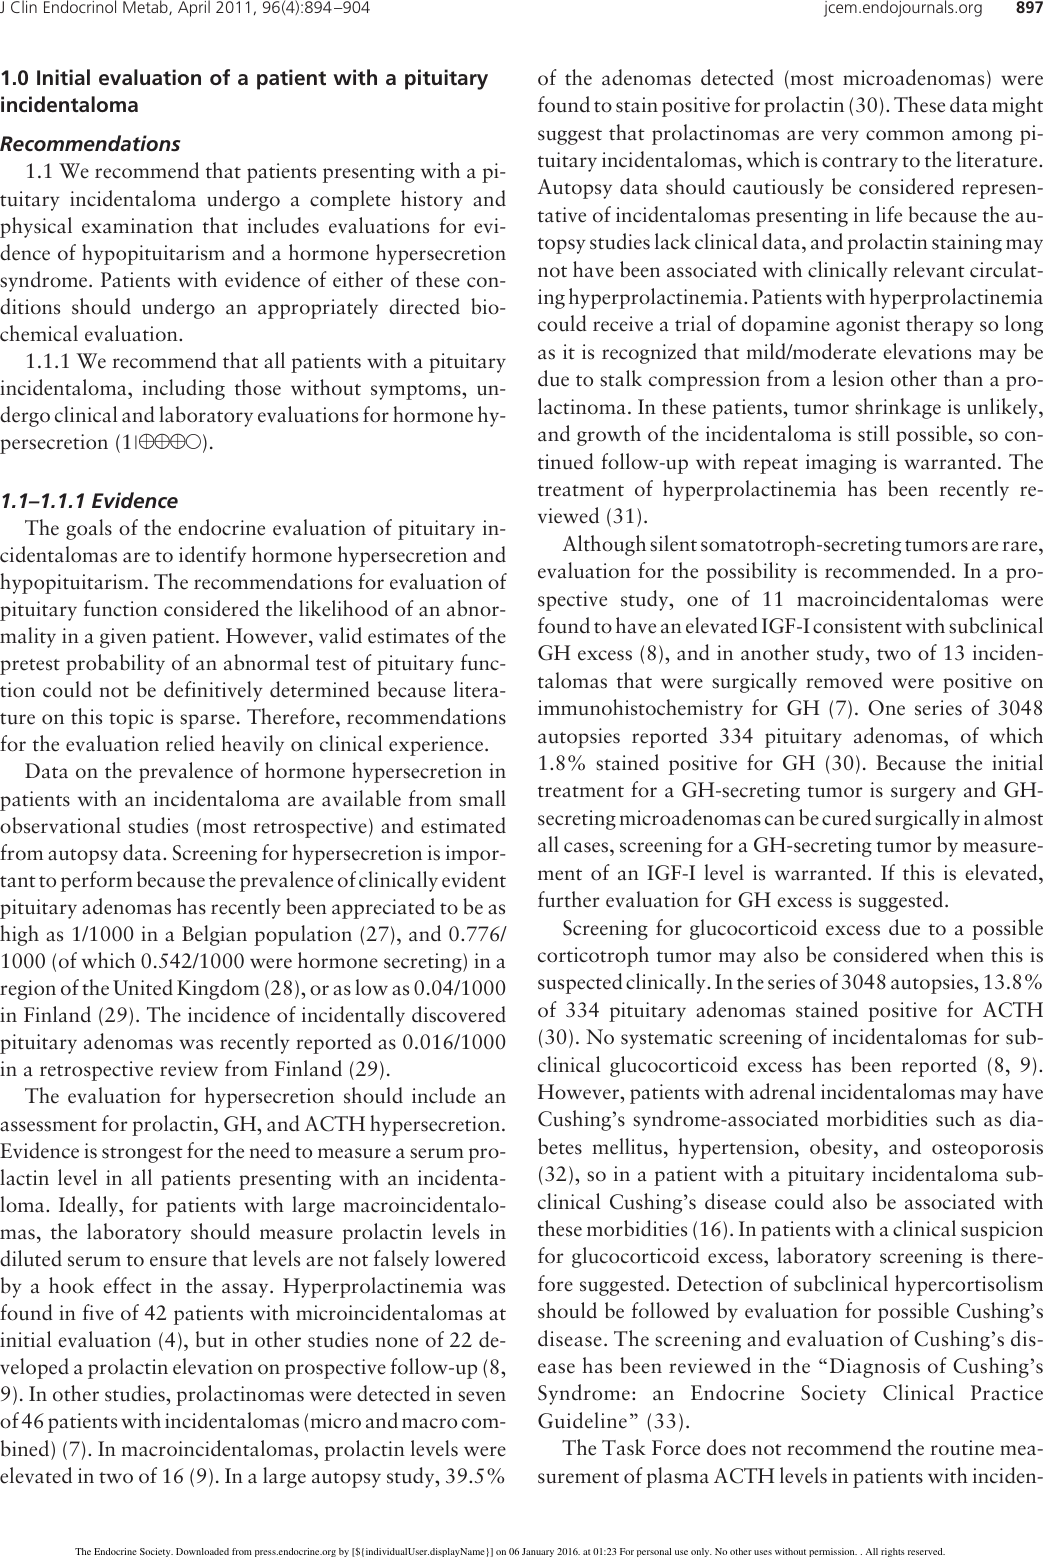 Page 4 of 11 - Pituitary Incidentaloma: An Endocrine Society Clinical Practice Guideline Incidentaloma Guide 2011